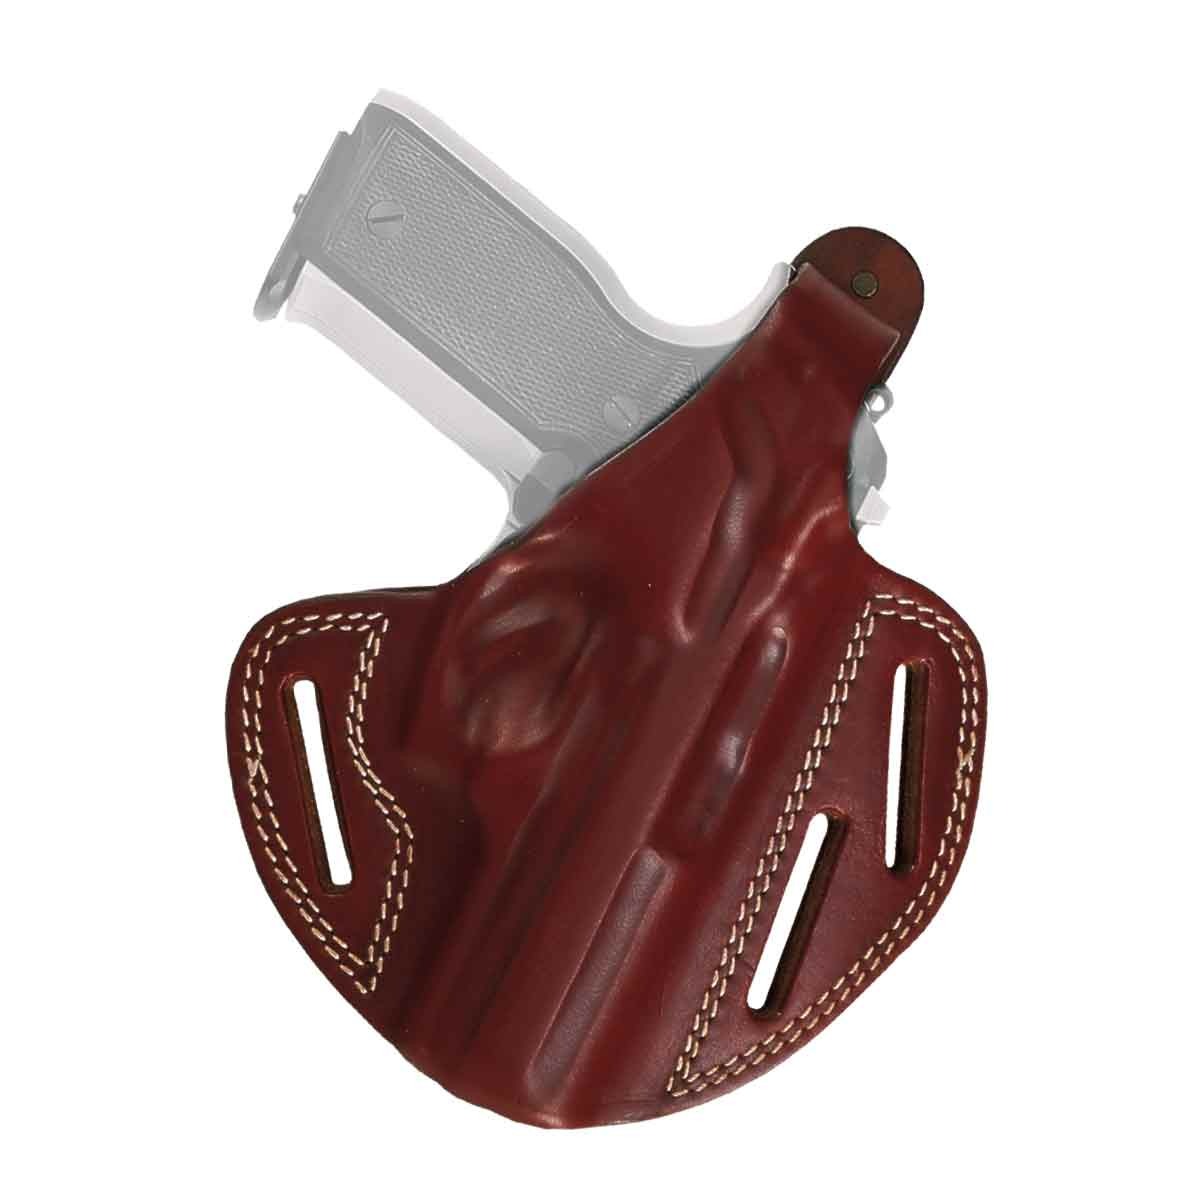 Pancake holster with two carrying positions